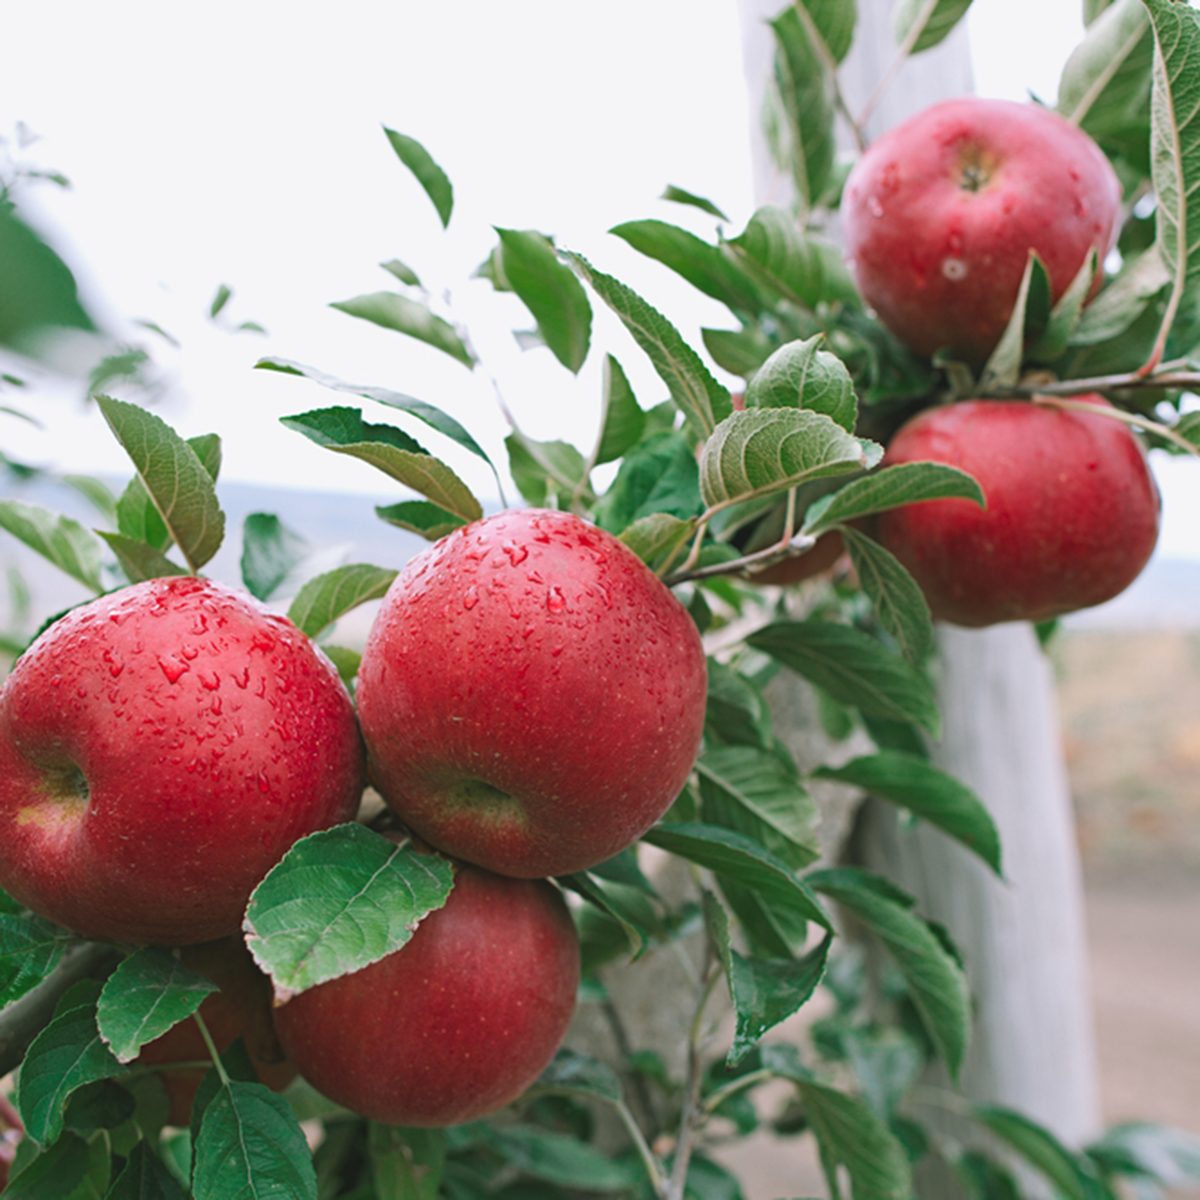 Closeup of a branch full of fresh red apples